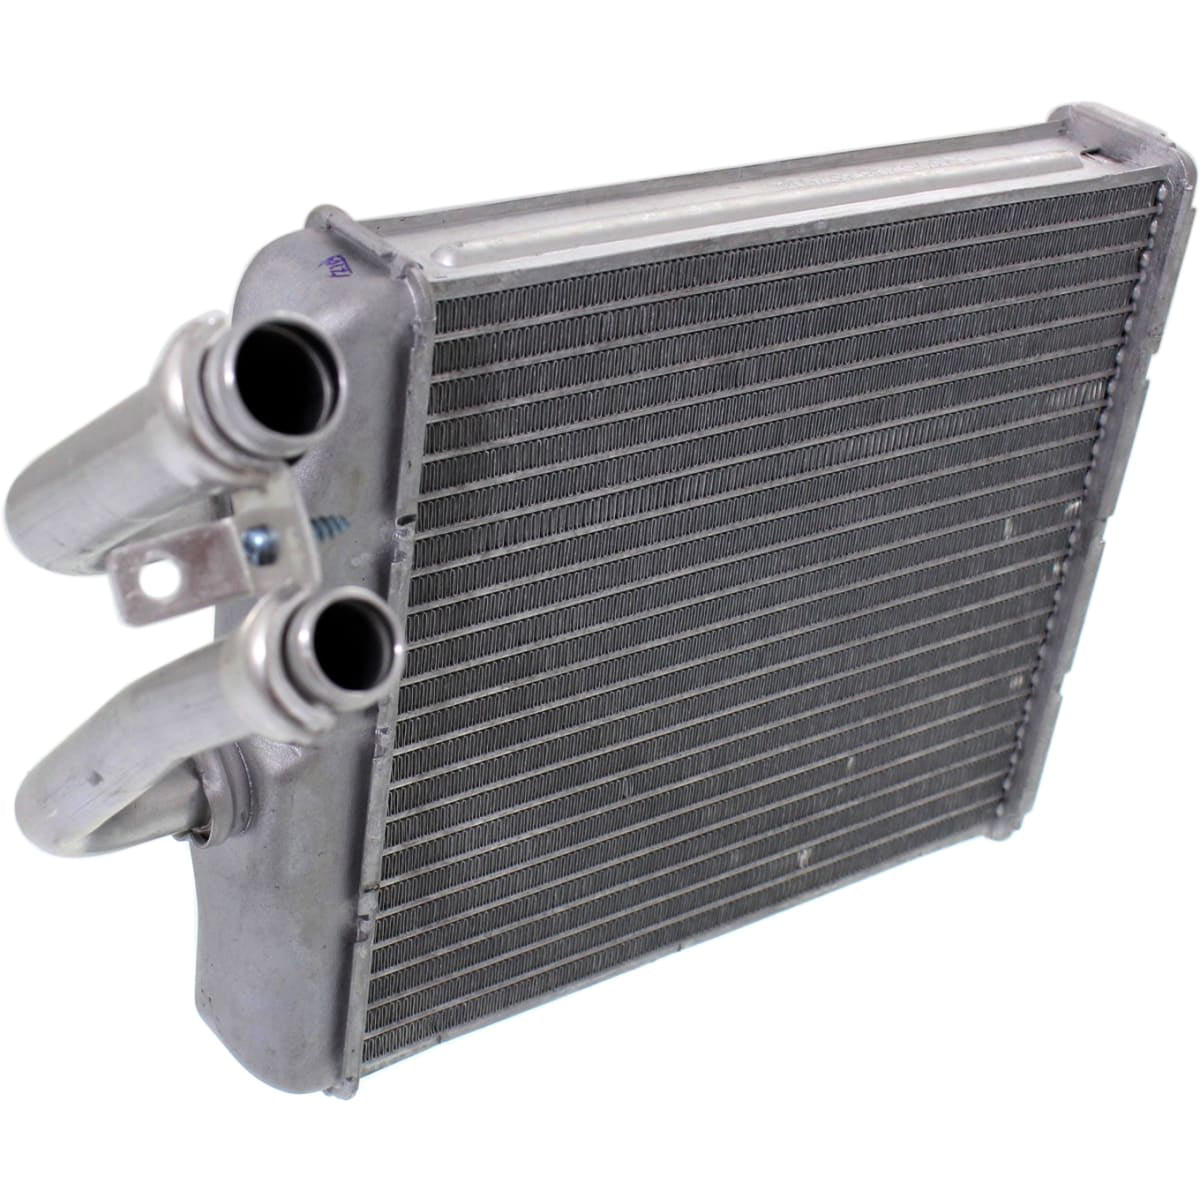 New Heater Core Front For Chevy Express Van SaVana Chevrolet 1500 GM3128103 Fits 52497763